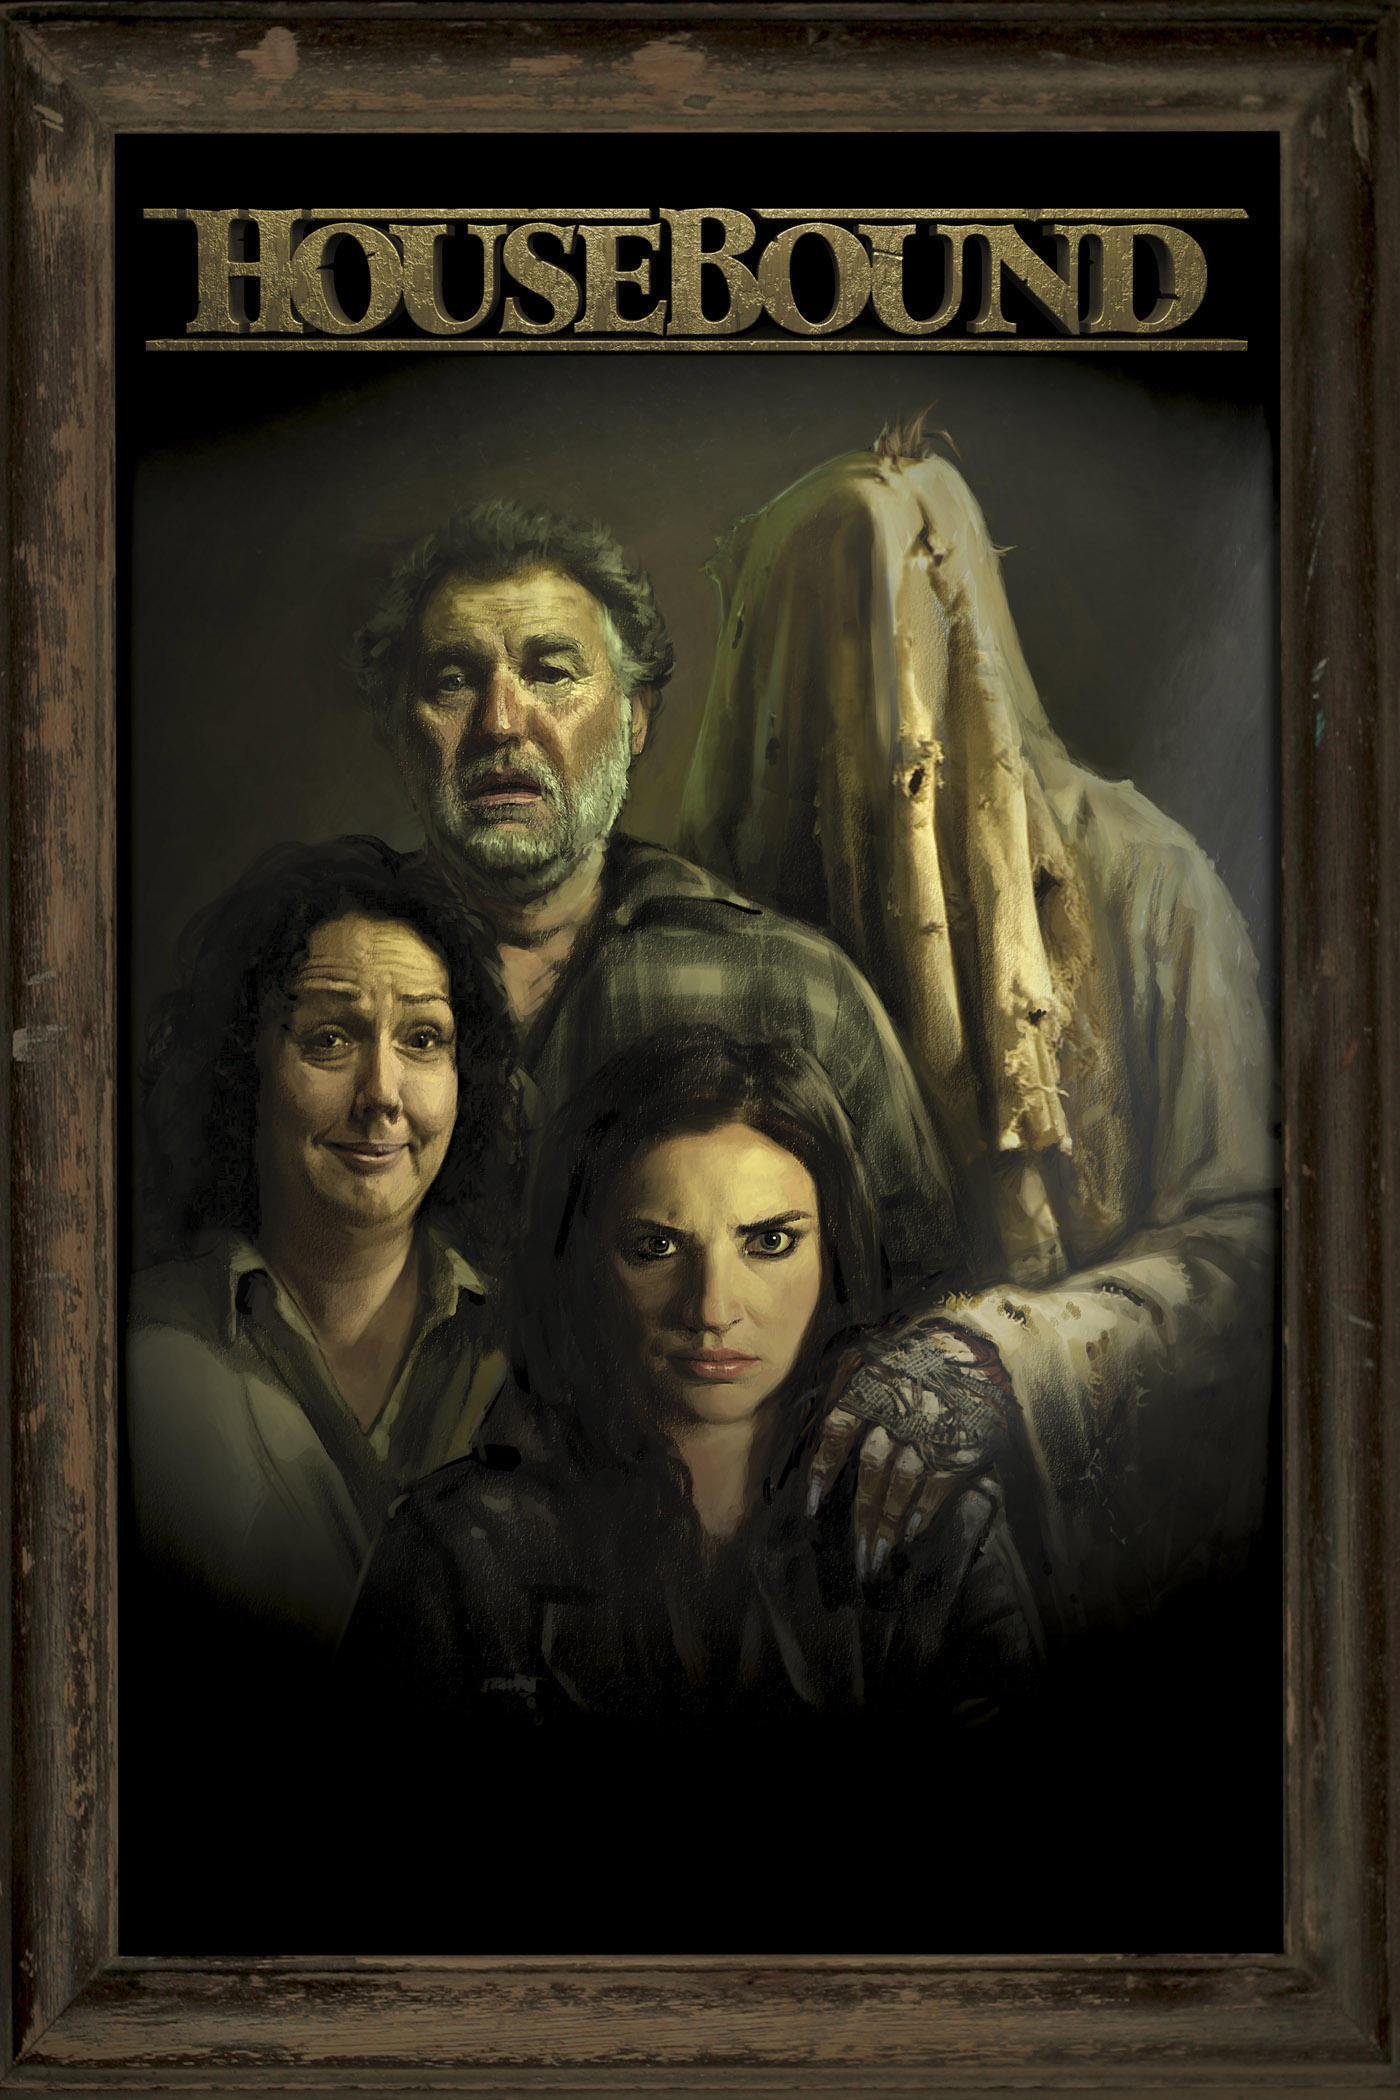 Poster for the movie "Housebound"